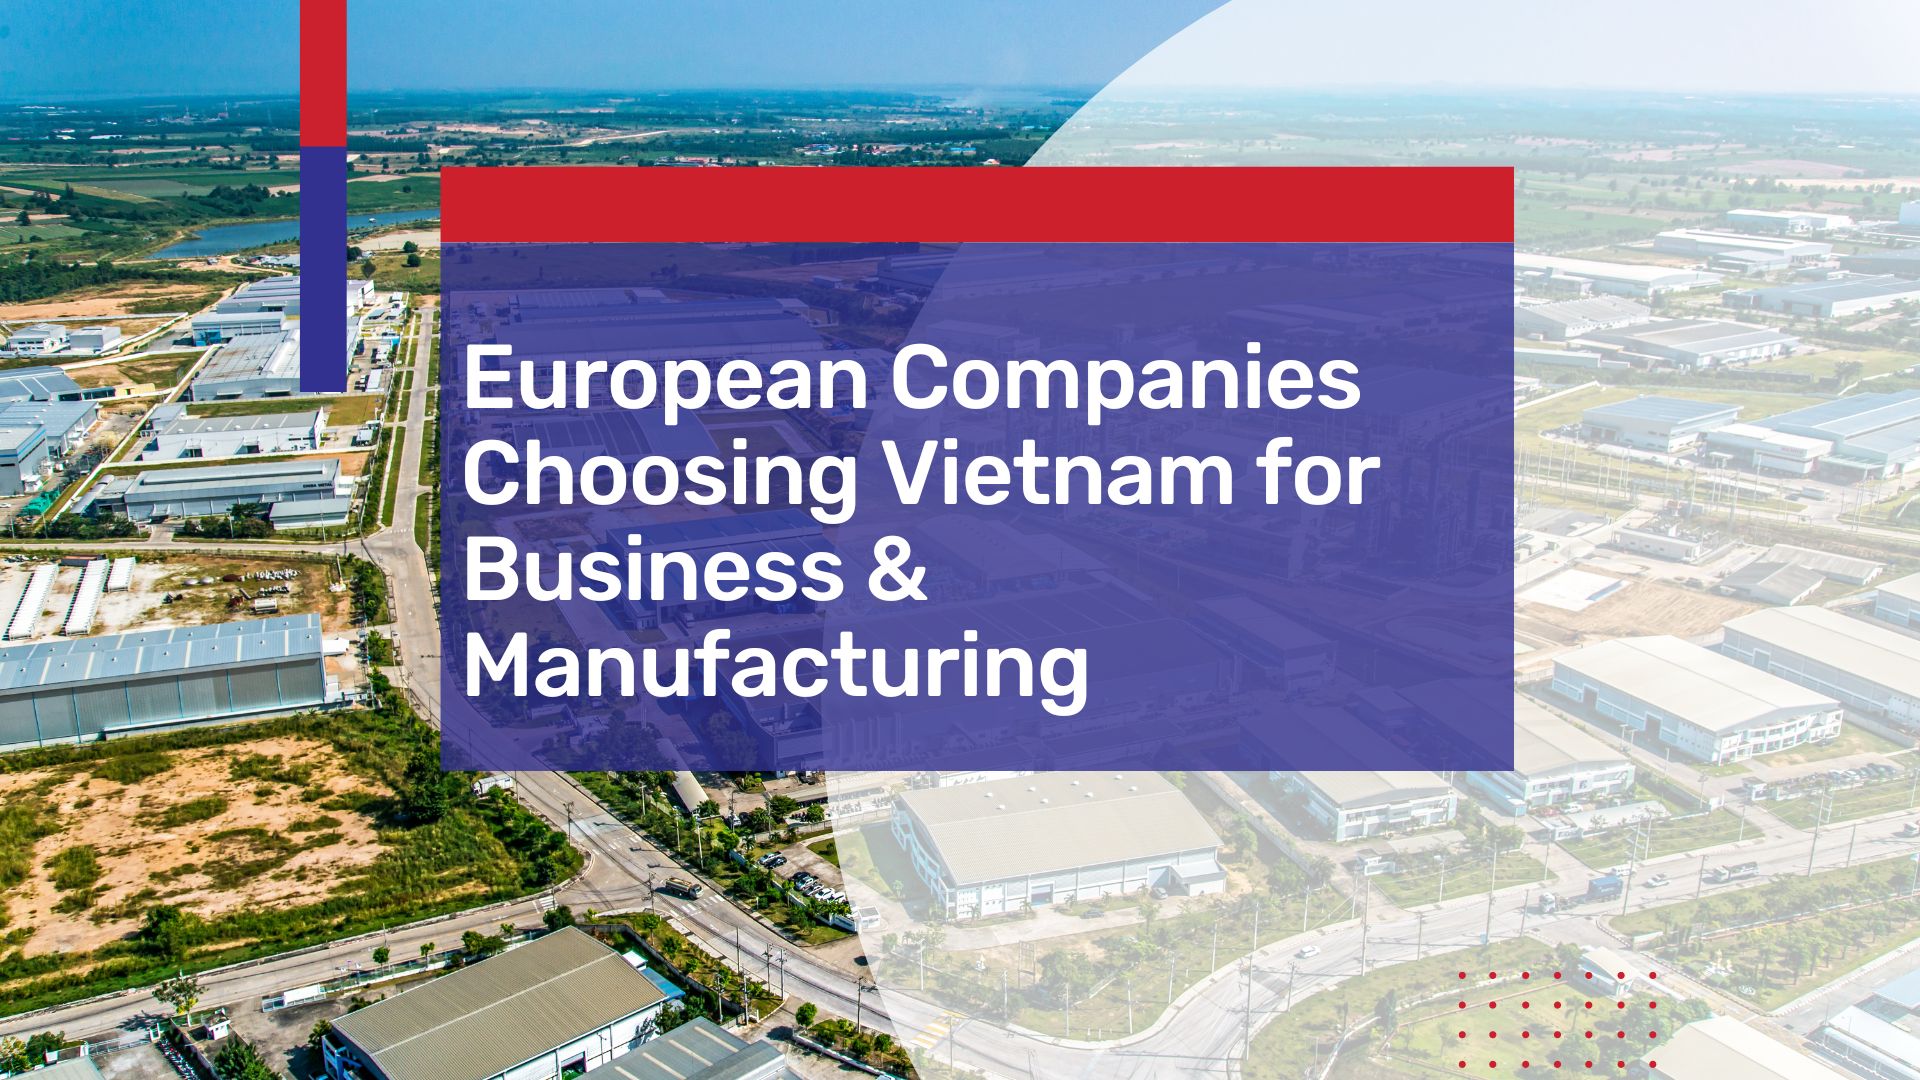 Why European Companies Increasingly Choosing Vietnam for Business & Manufacturing – An Overview